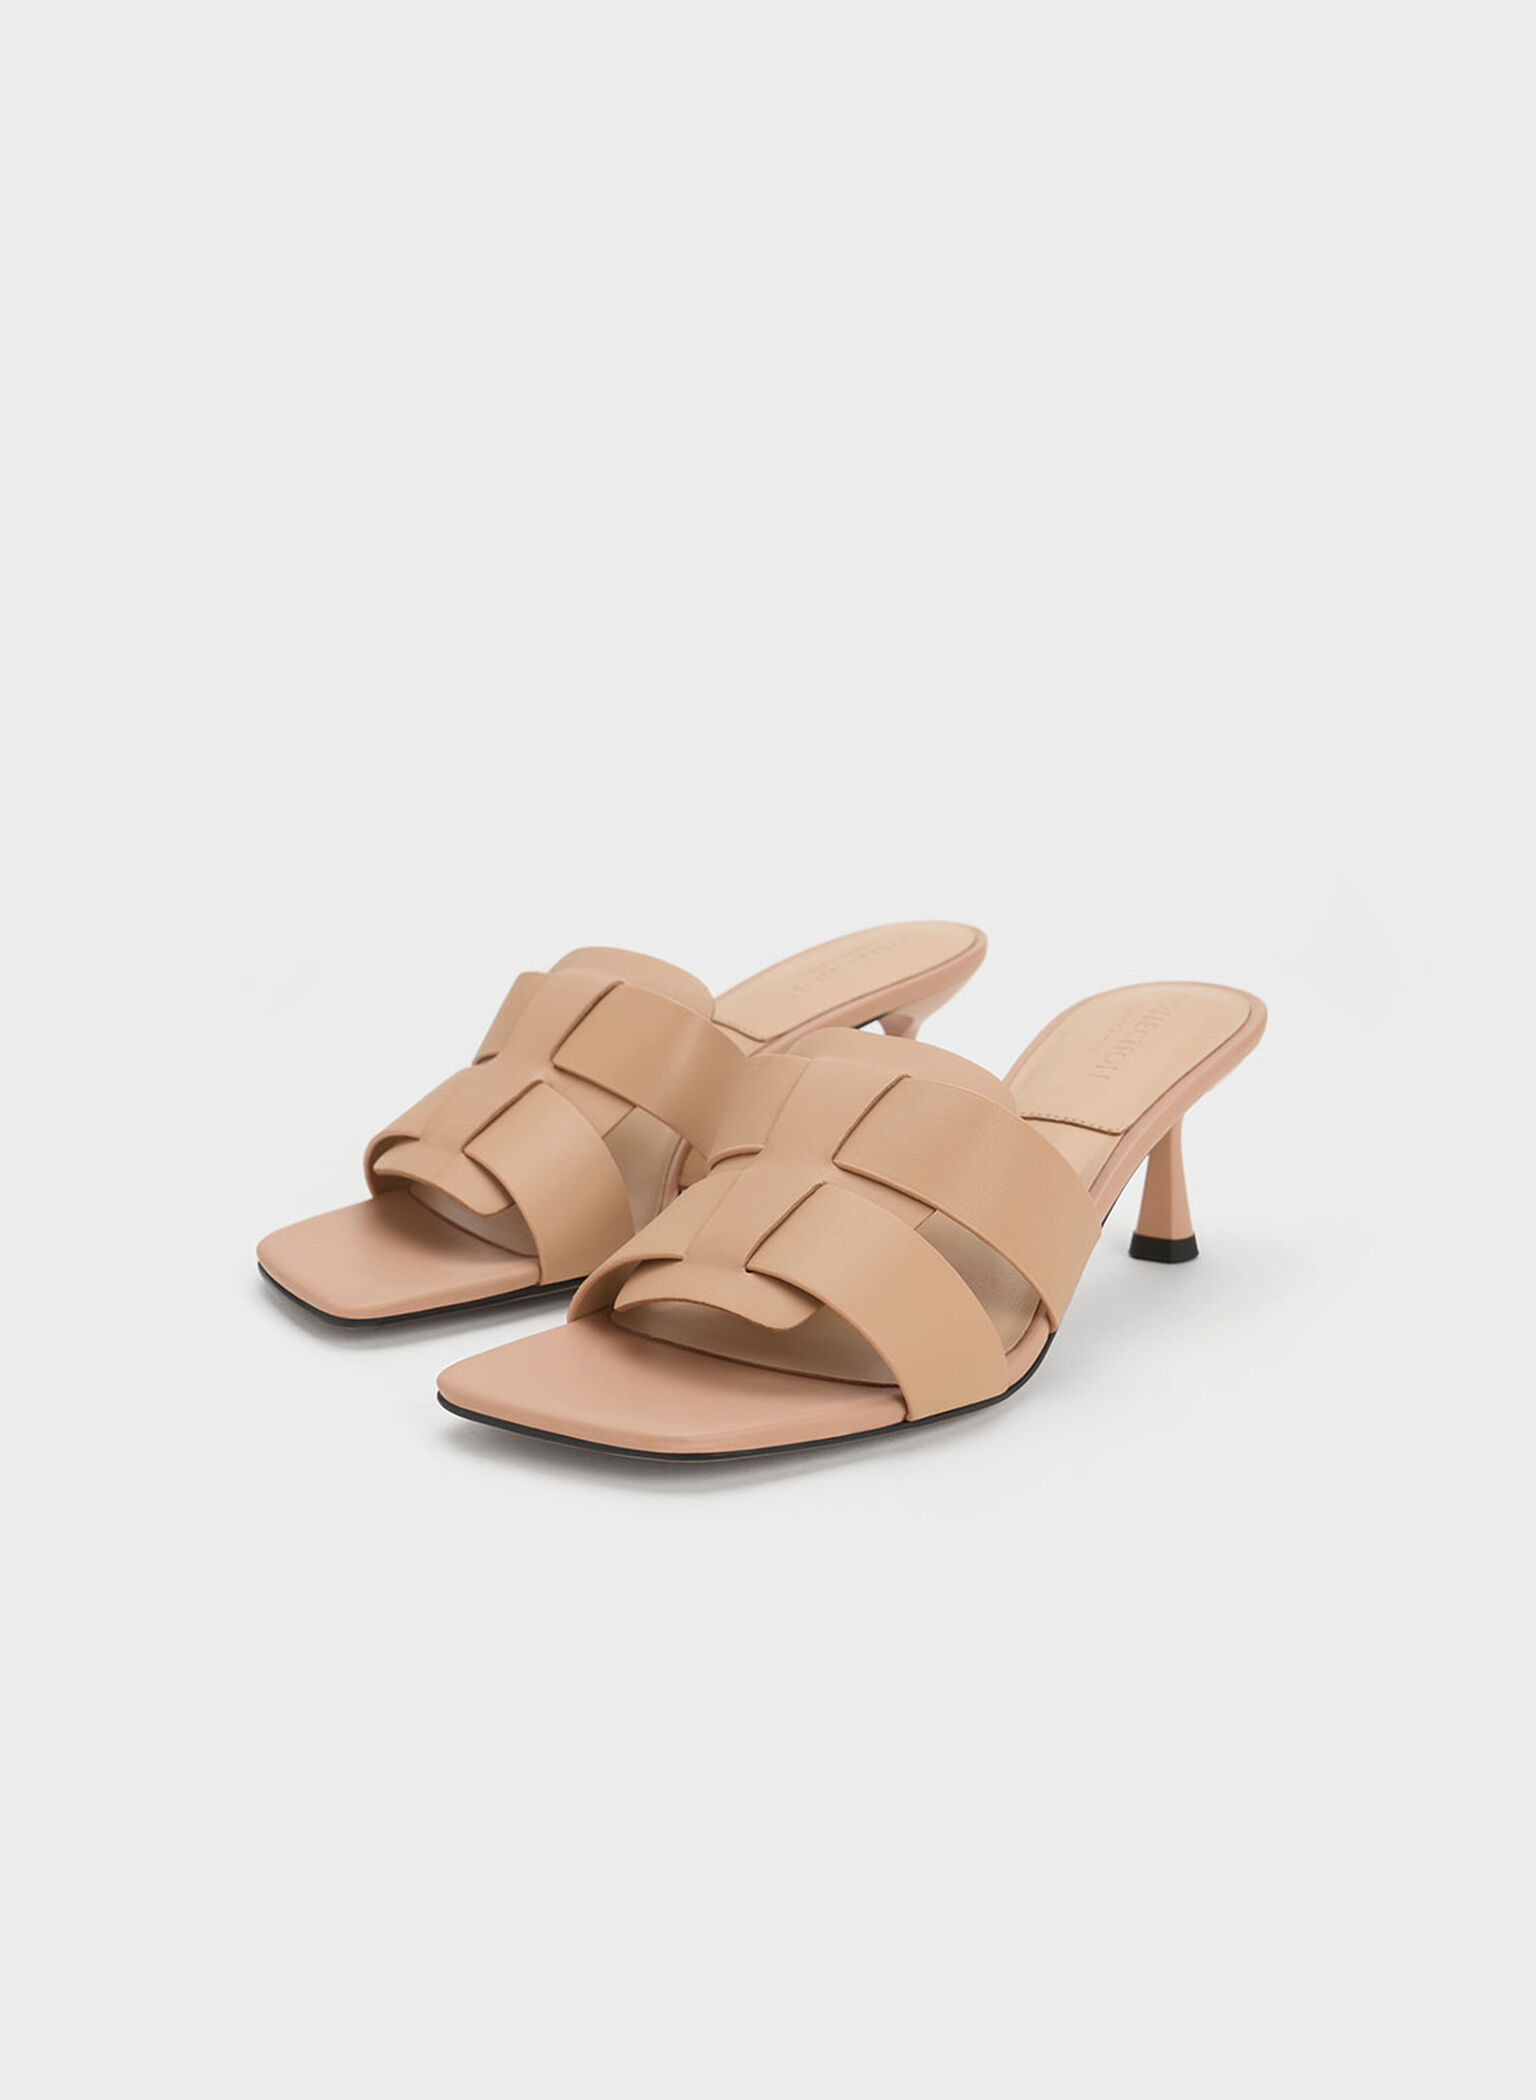 Nude Trichelle Interwoven Leather Spool Heel Mules - CHARLES & KEITH US